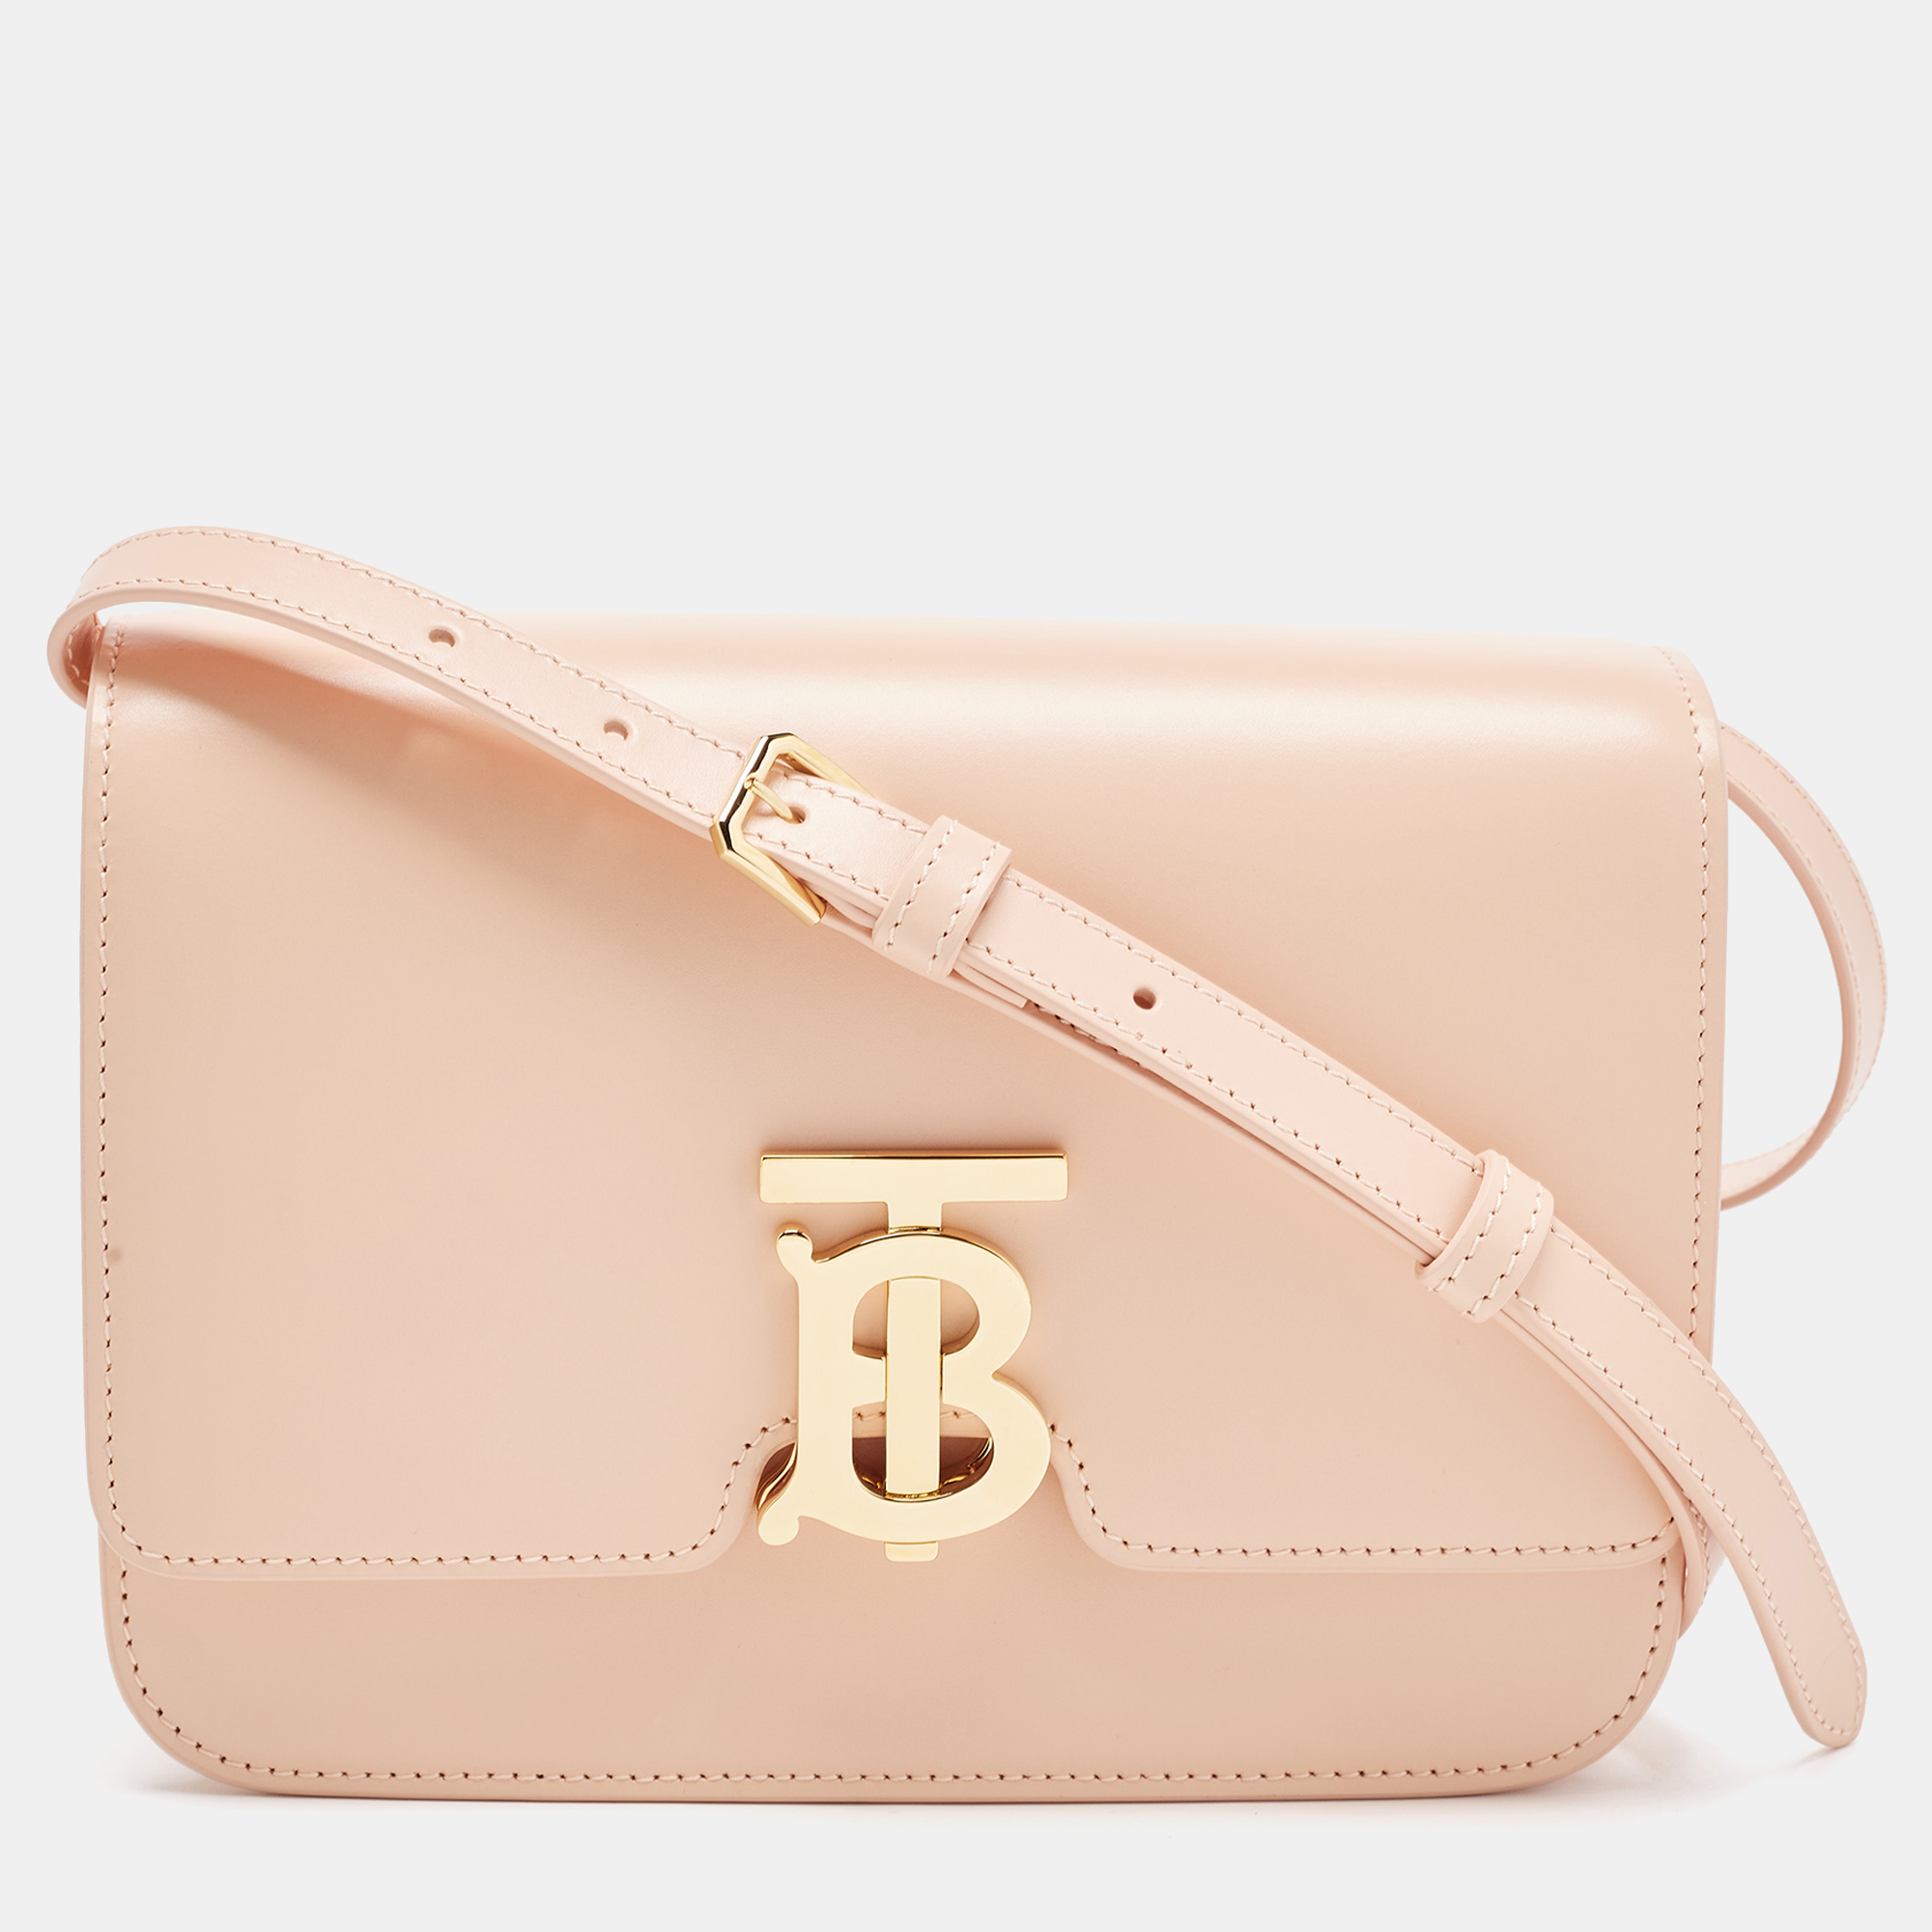 Burberry Peach PInk Leather Small TB Shoulder Bag